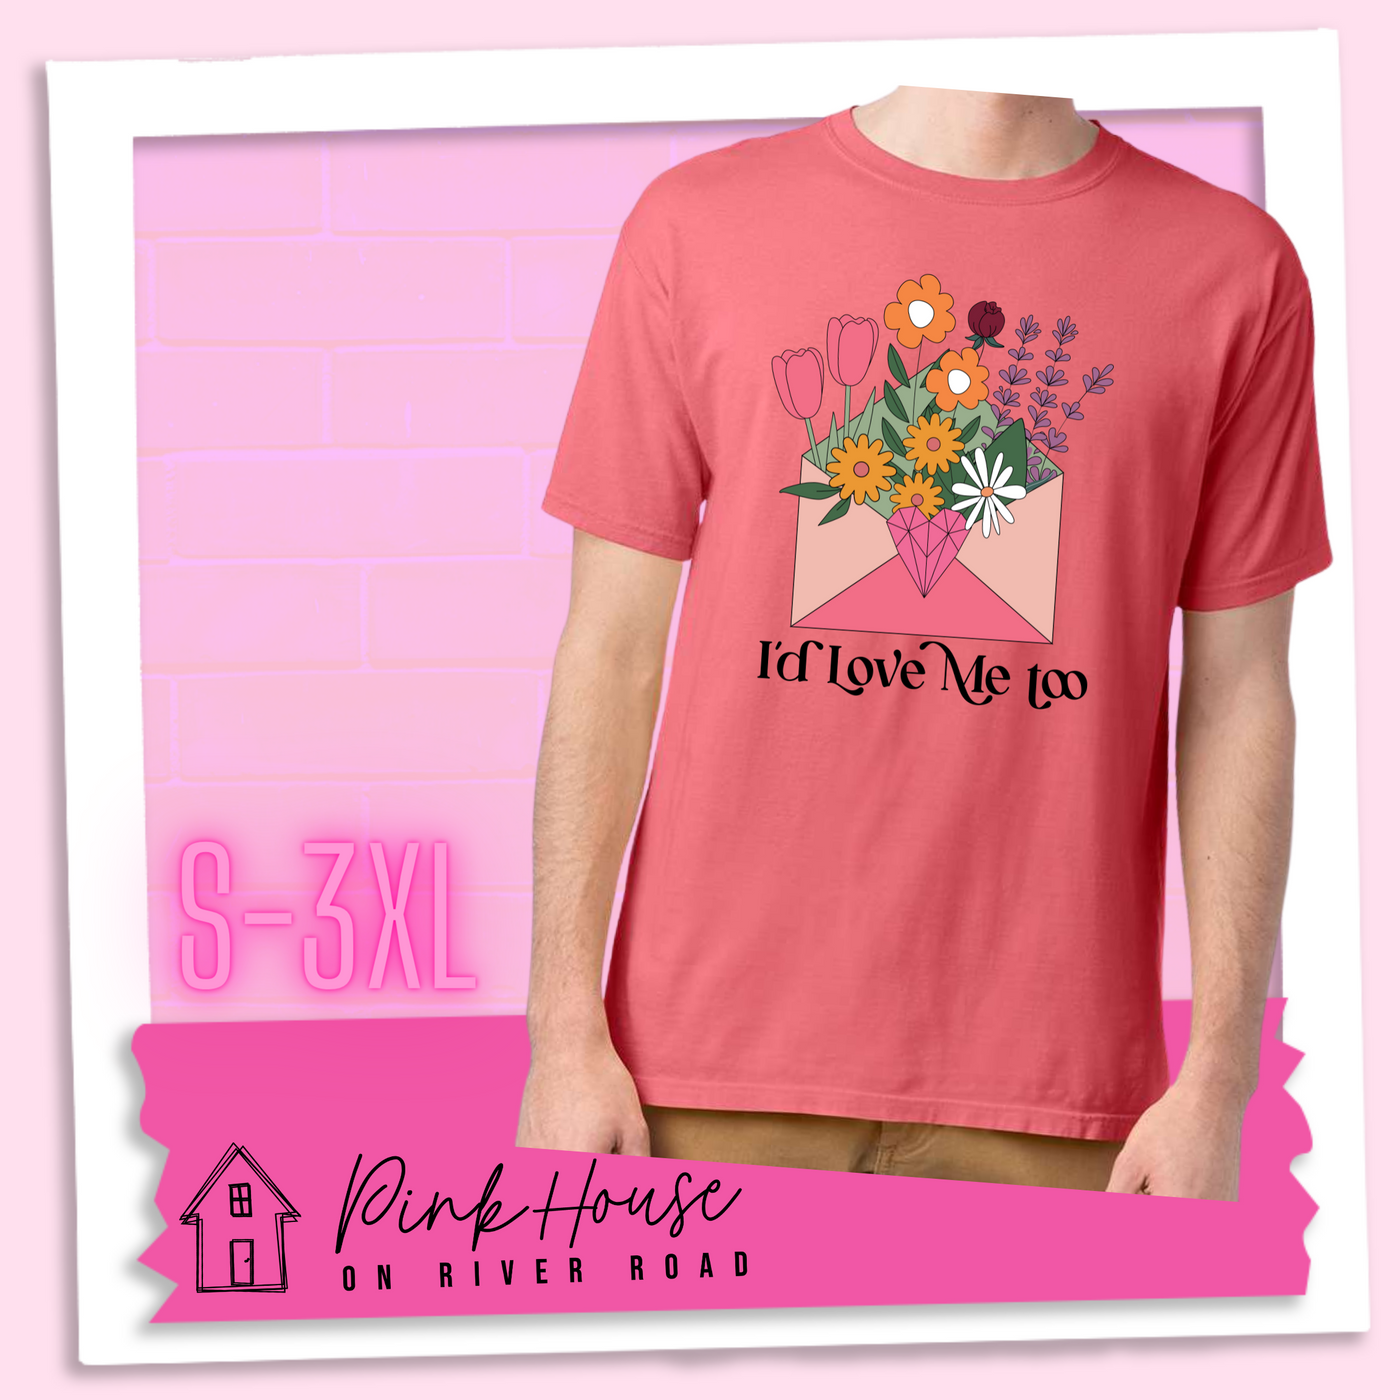 Coral tee with a graphic of a pink envelope filled with different types of flowers and a geometric heart seal. The text underneath reads "I'd Love Me Too"